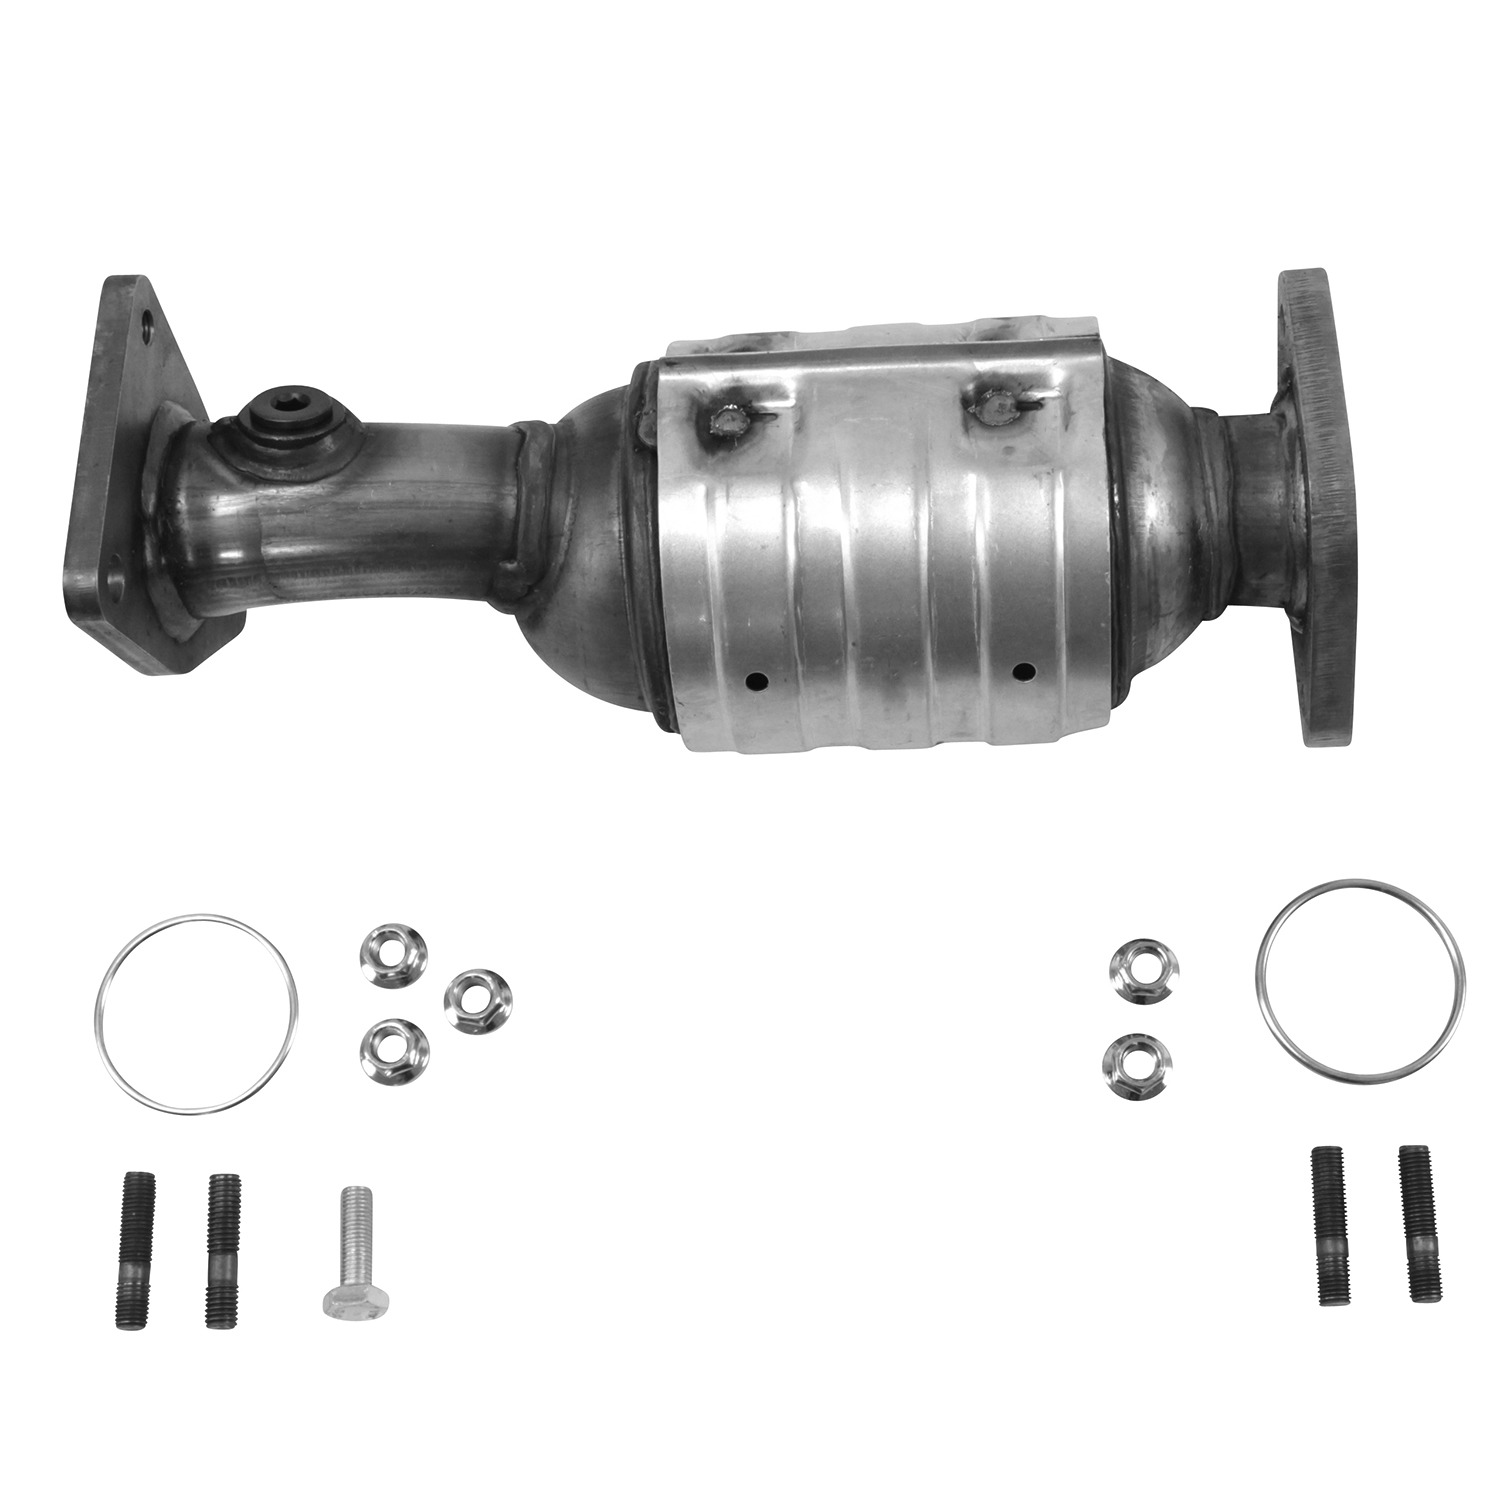 Fits:2005-2016  Nissan Frontier with 4.0L Engine/2012-2016 Nissan NV1500 with 4.0L Engine/2012-2016 Nissan NV2500 with 4.0L Engine/2012-2017 Nissan NV3500 with 4.0L Engine/2005-2012 Nissan Pathfinder with  4.0L Engine/2005-2015 Nissan Xterra with 4.0L Engine/2009-2012  6 Cyl.  Suzuki Equator with 4.0L Engine